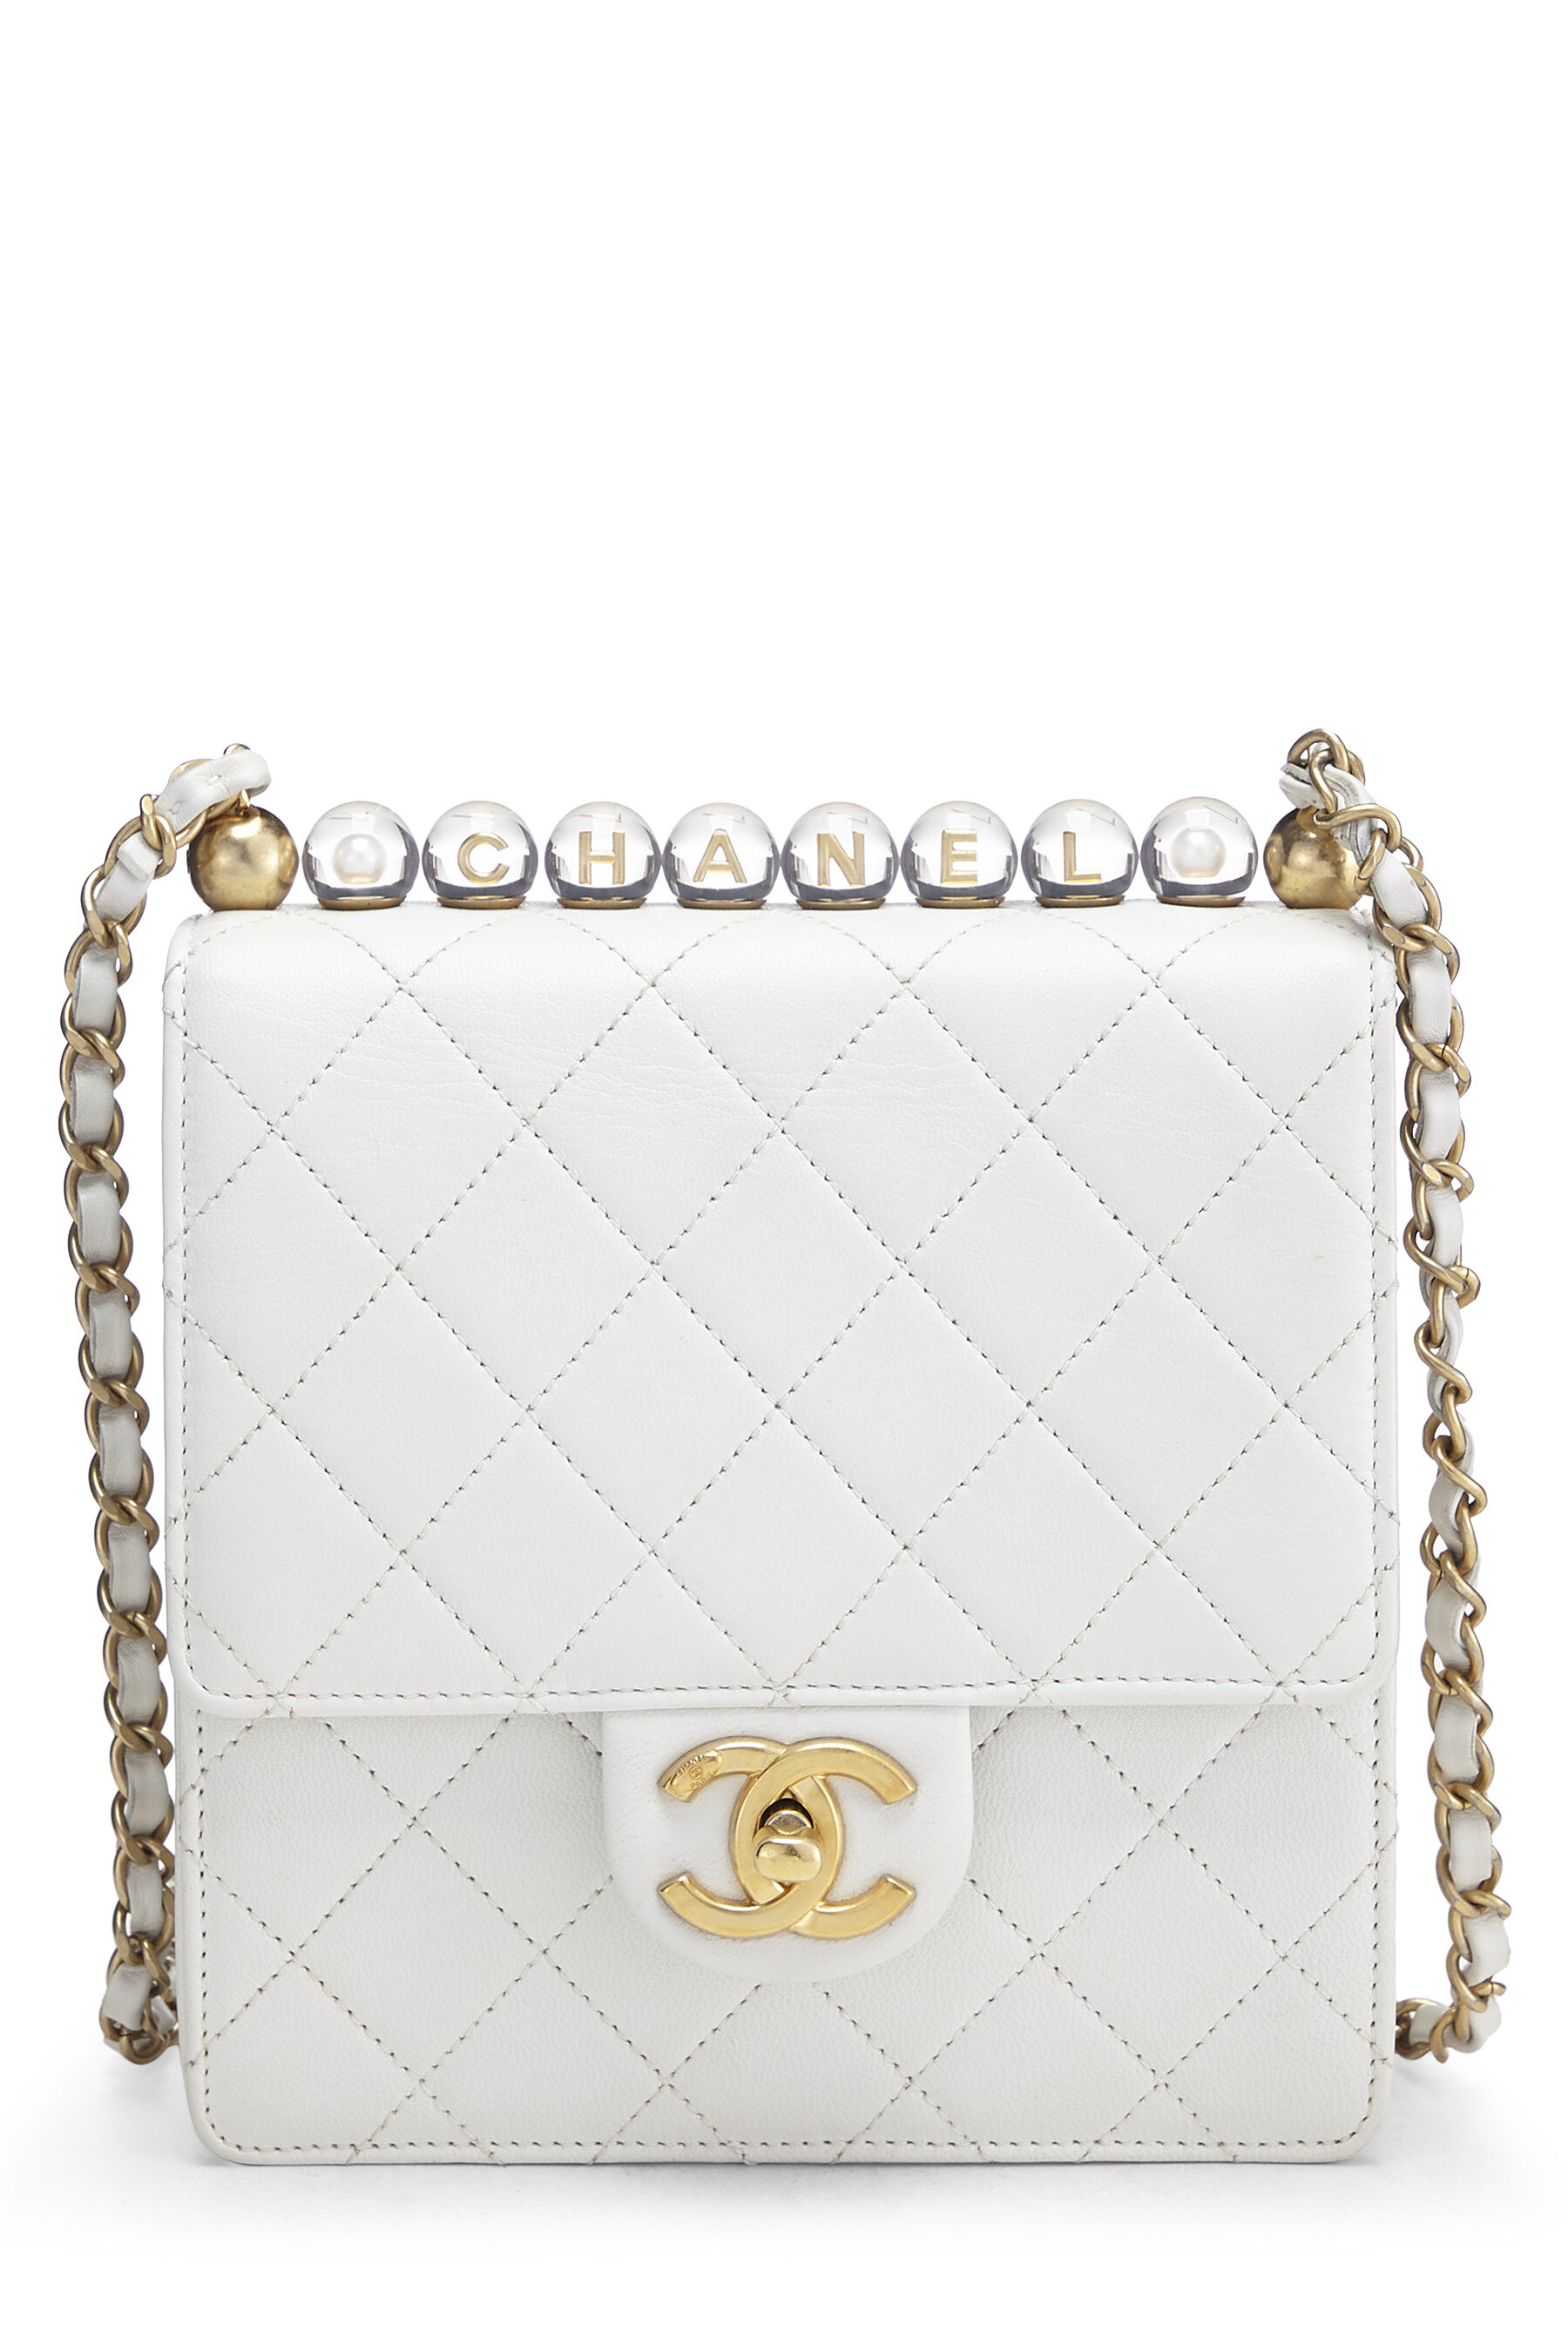 Chanel - White Quilted Lambskin Chic Pearl Chain Flap Small